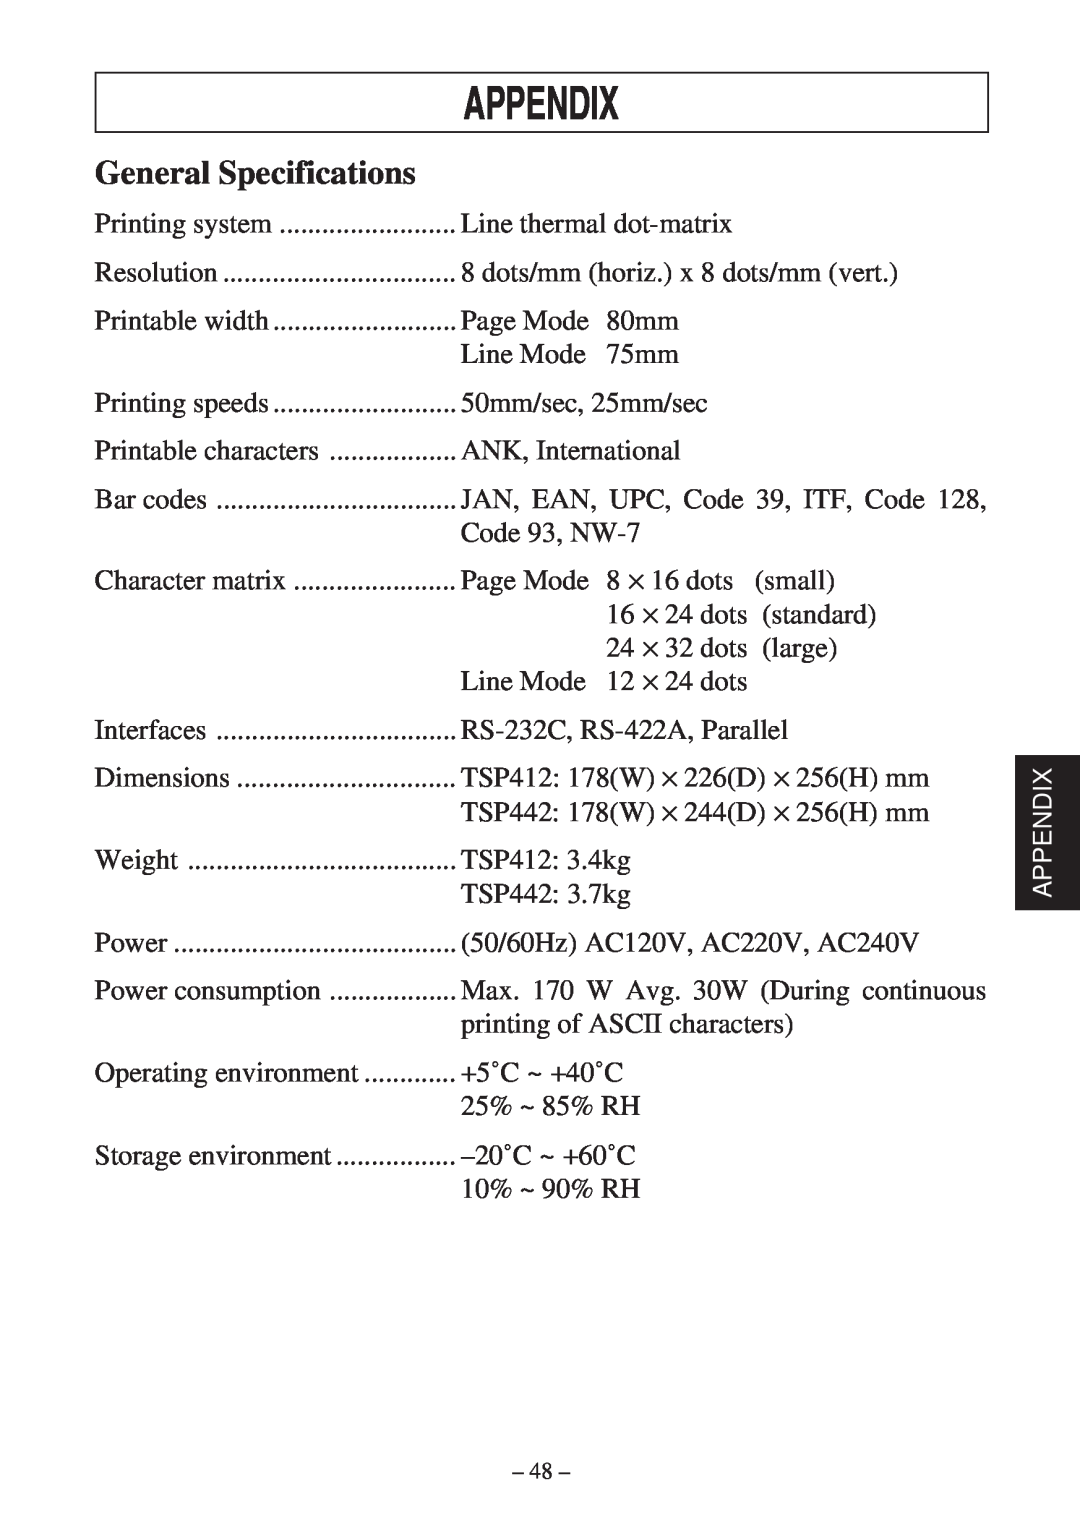 Star Micronics TSP400 Series user manual Appendix, General Specifications 